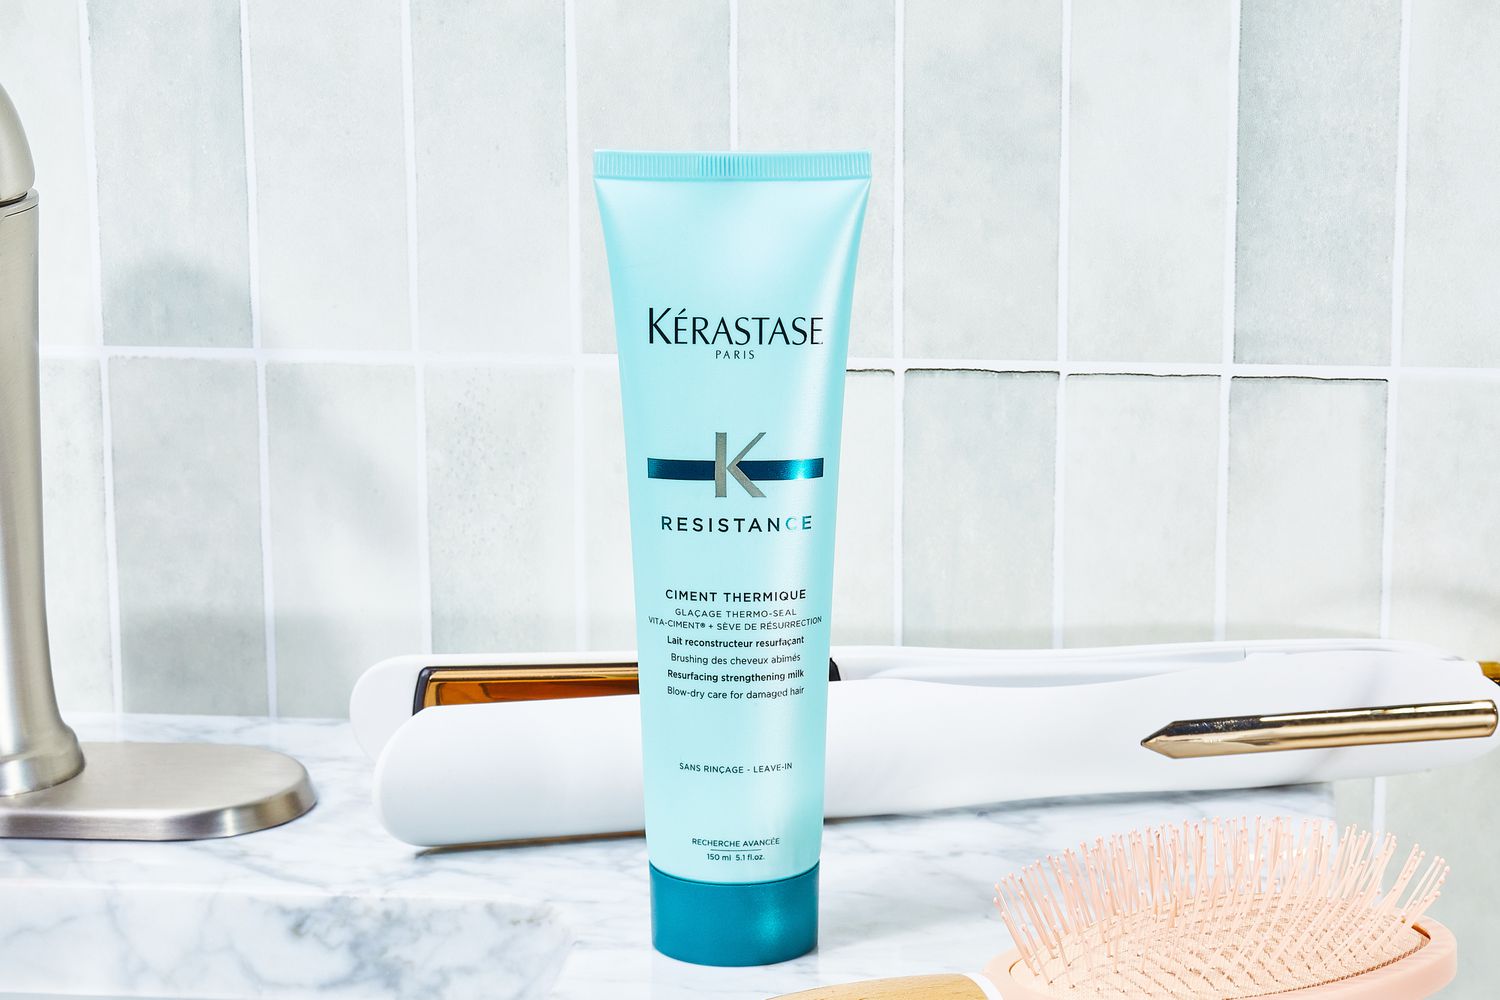 Kerastase RÃ©sistance Ciment Thermique Blow Dry Primer sits on bathroom counter with hair styling tools